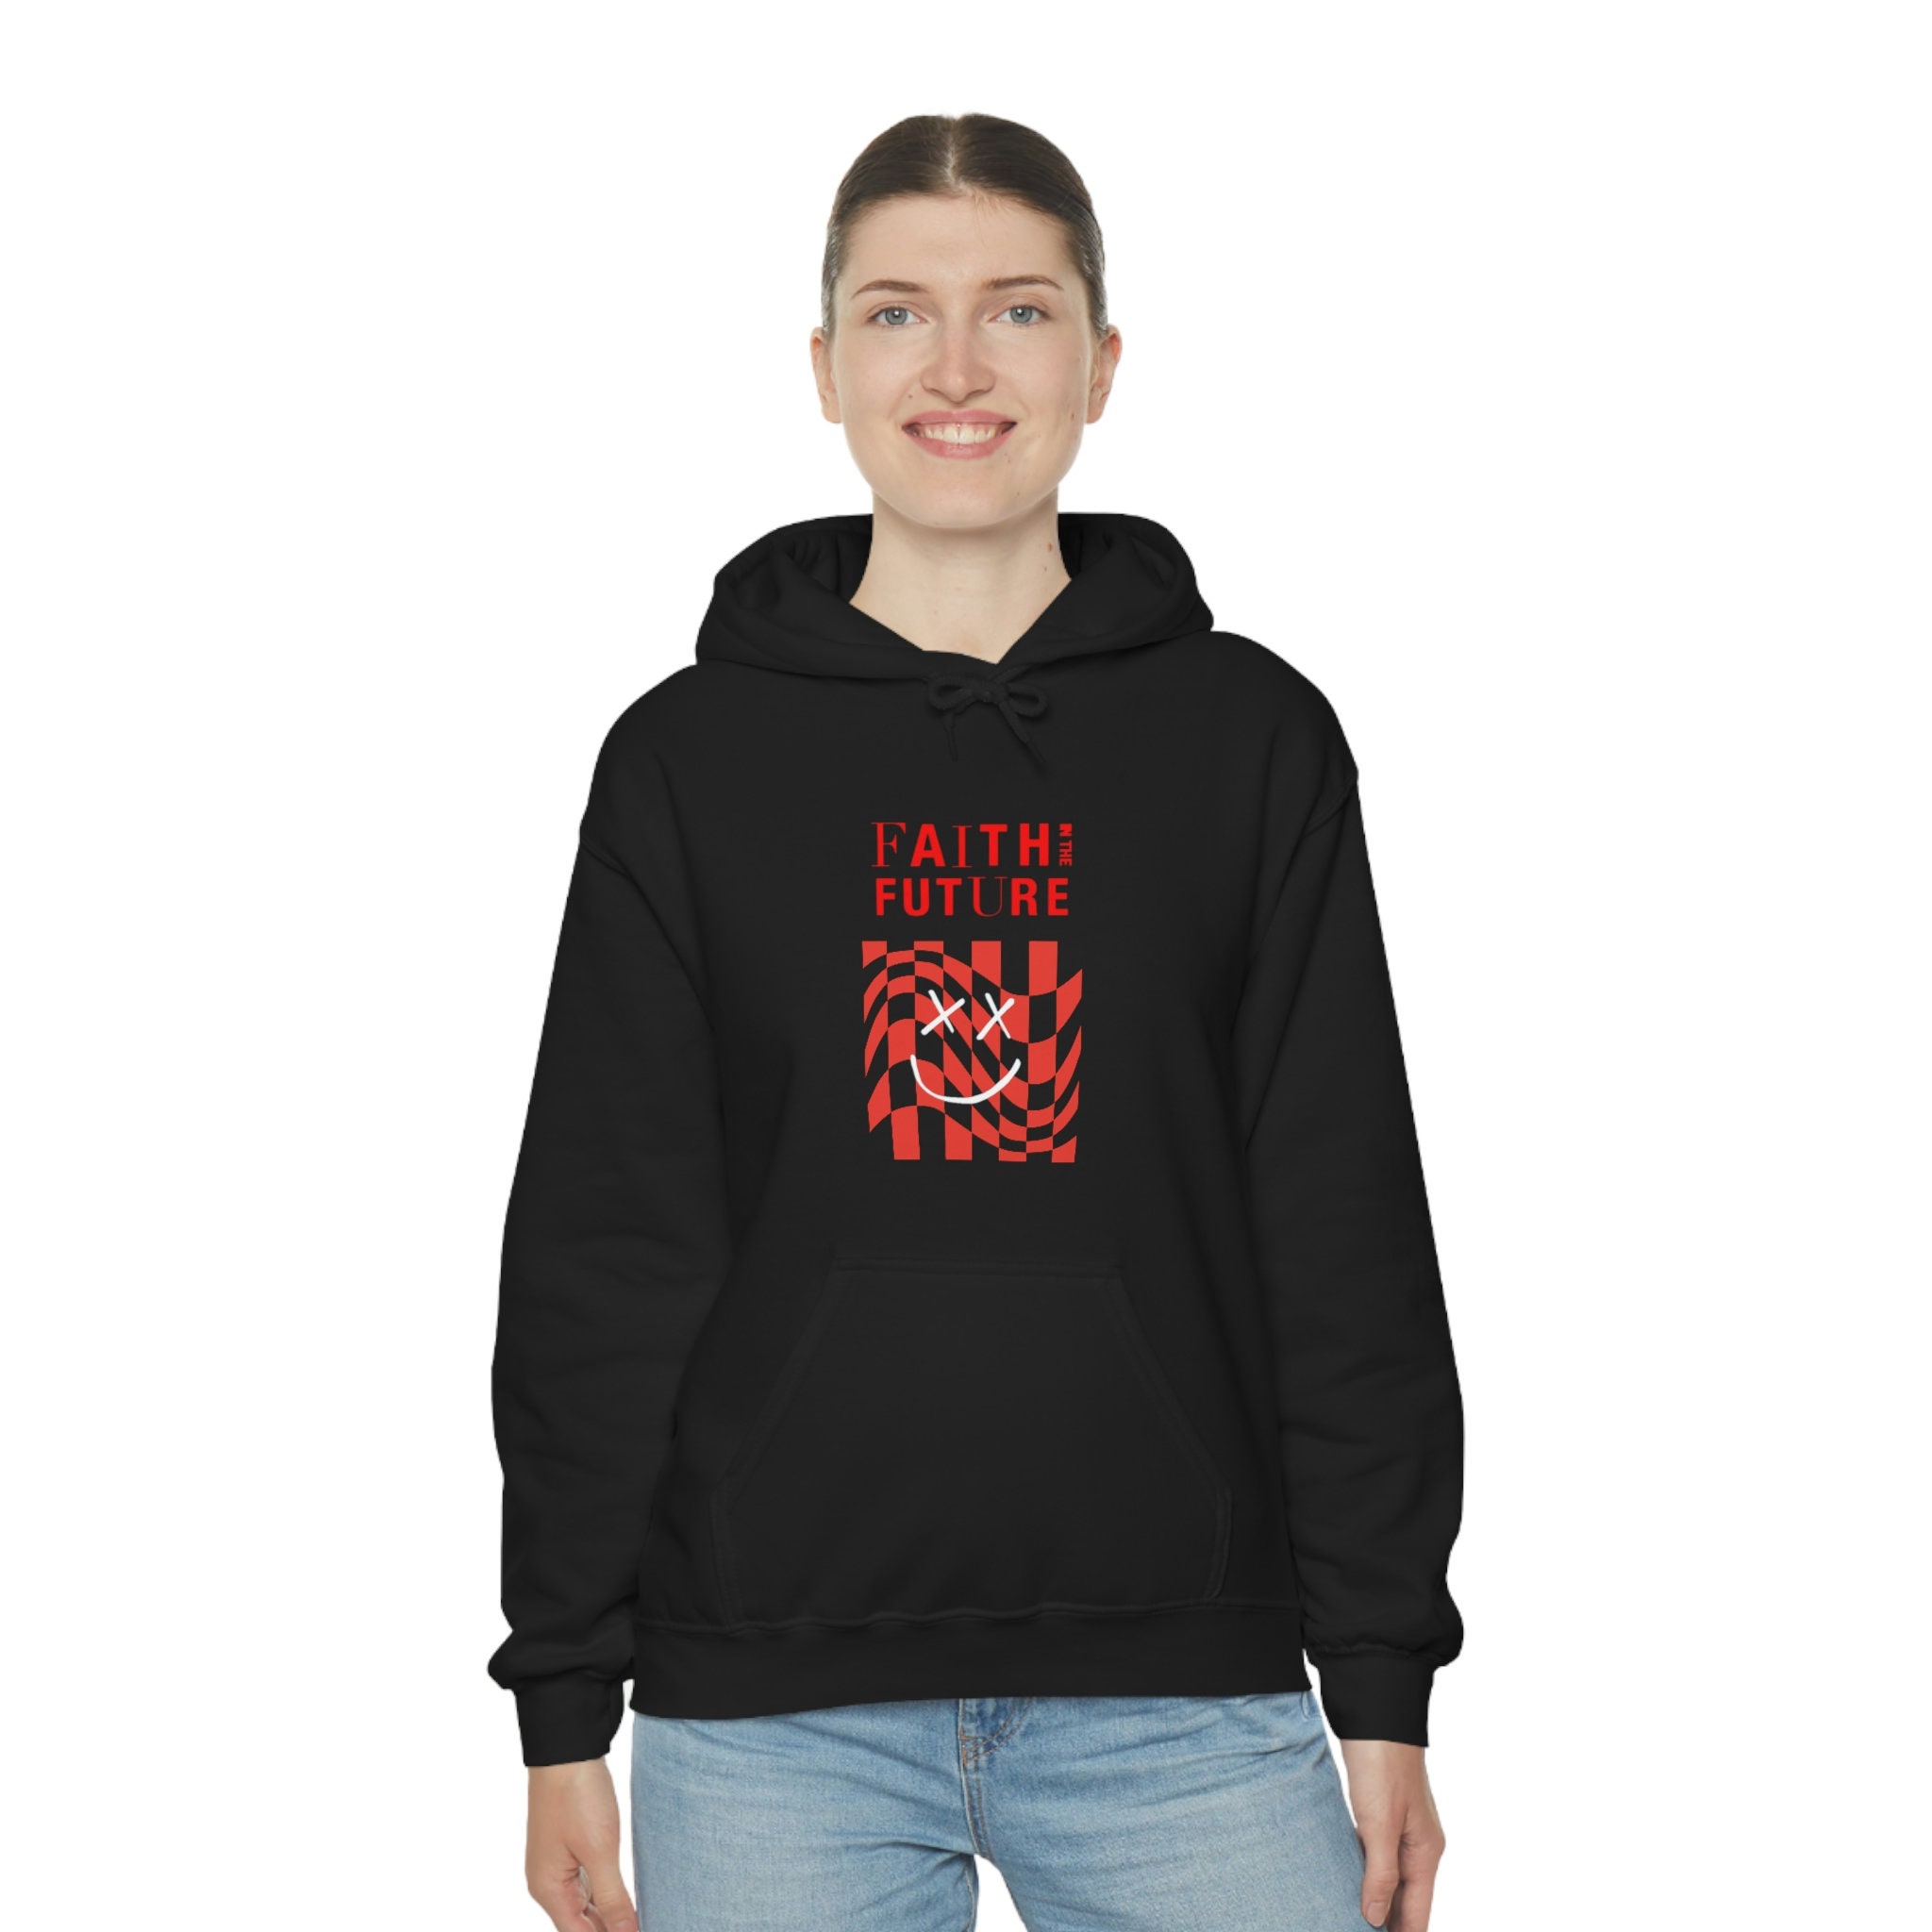 Buy Louis Tomlinson Faith in the Future Hooded Sweatshirt Online in India 